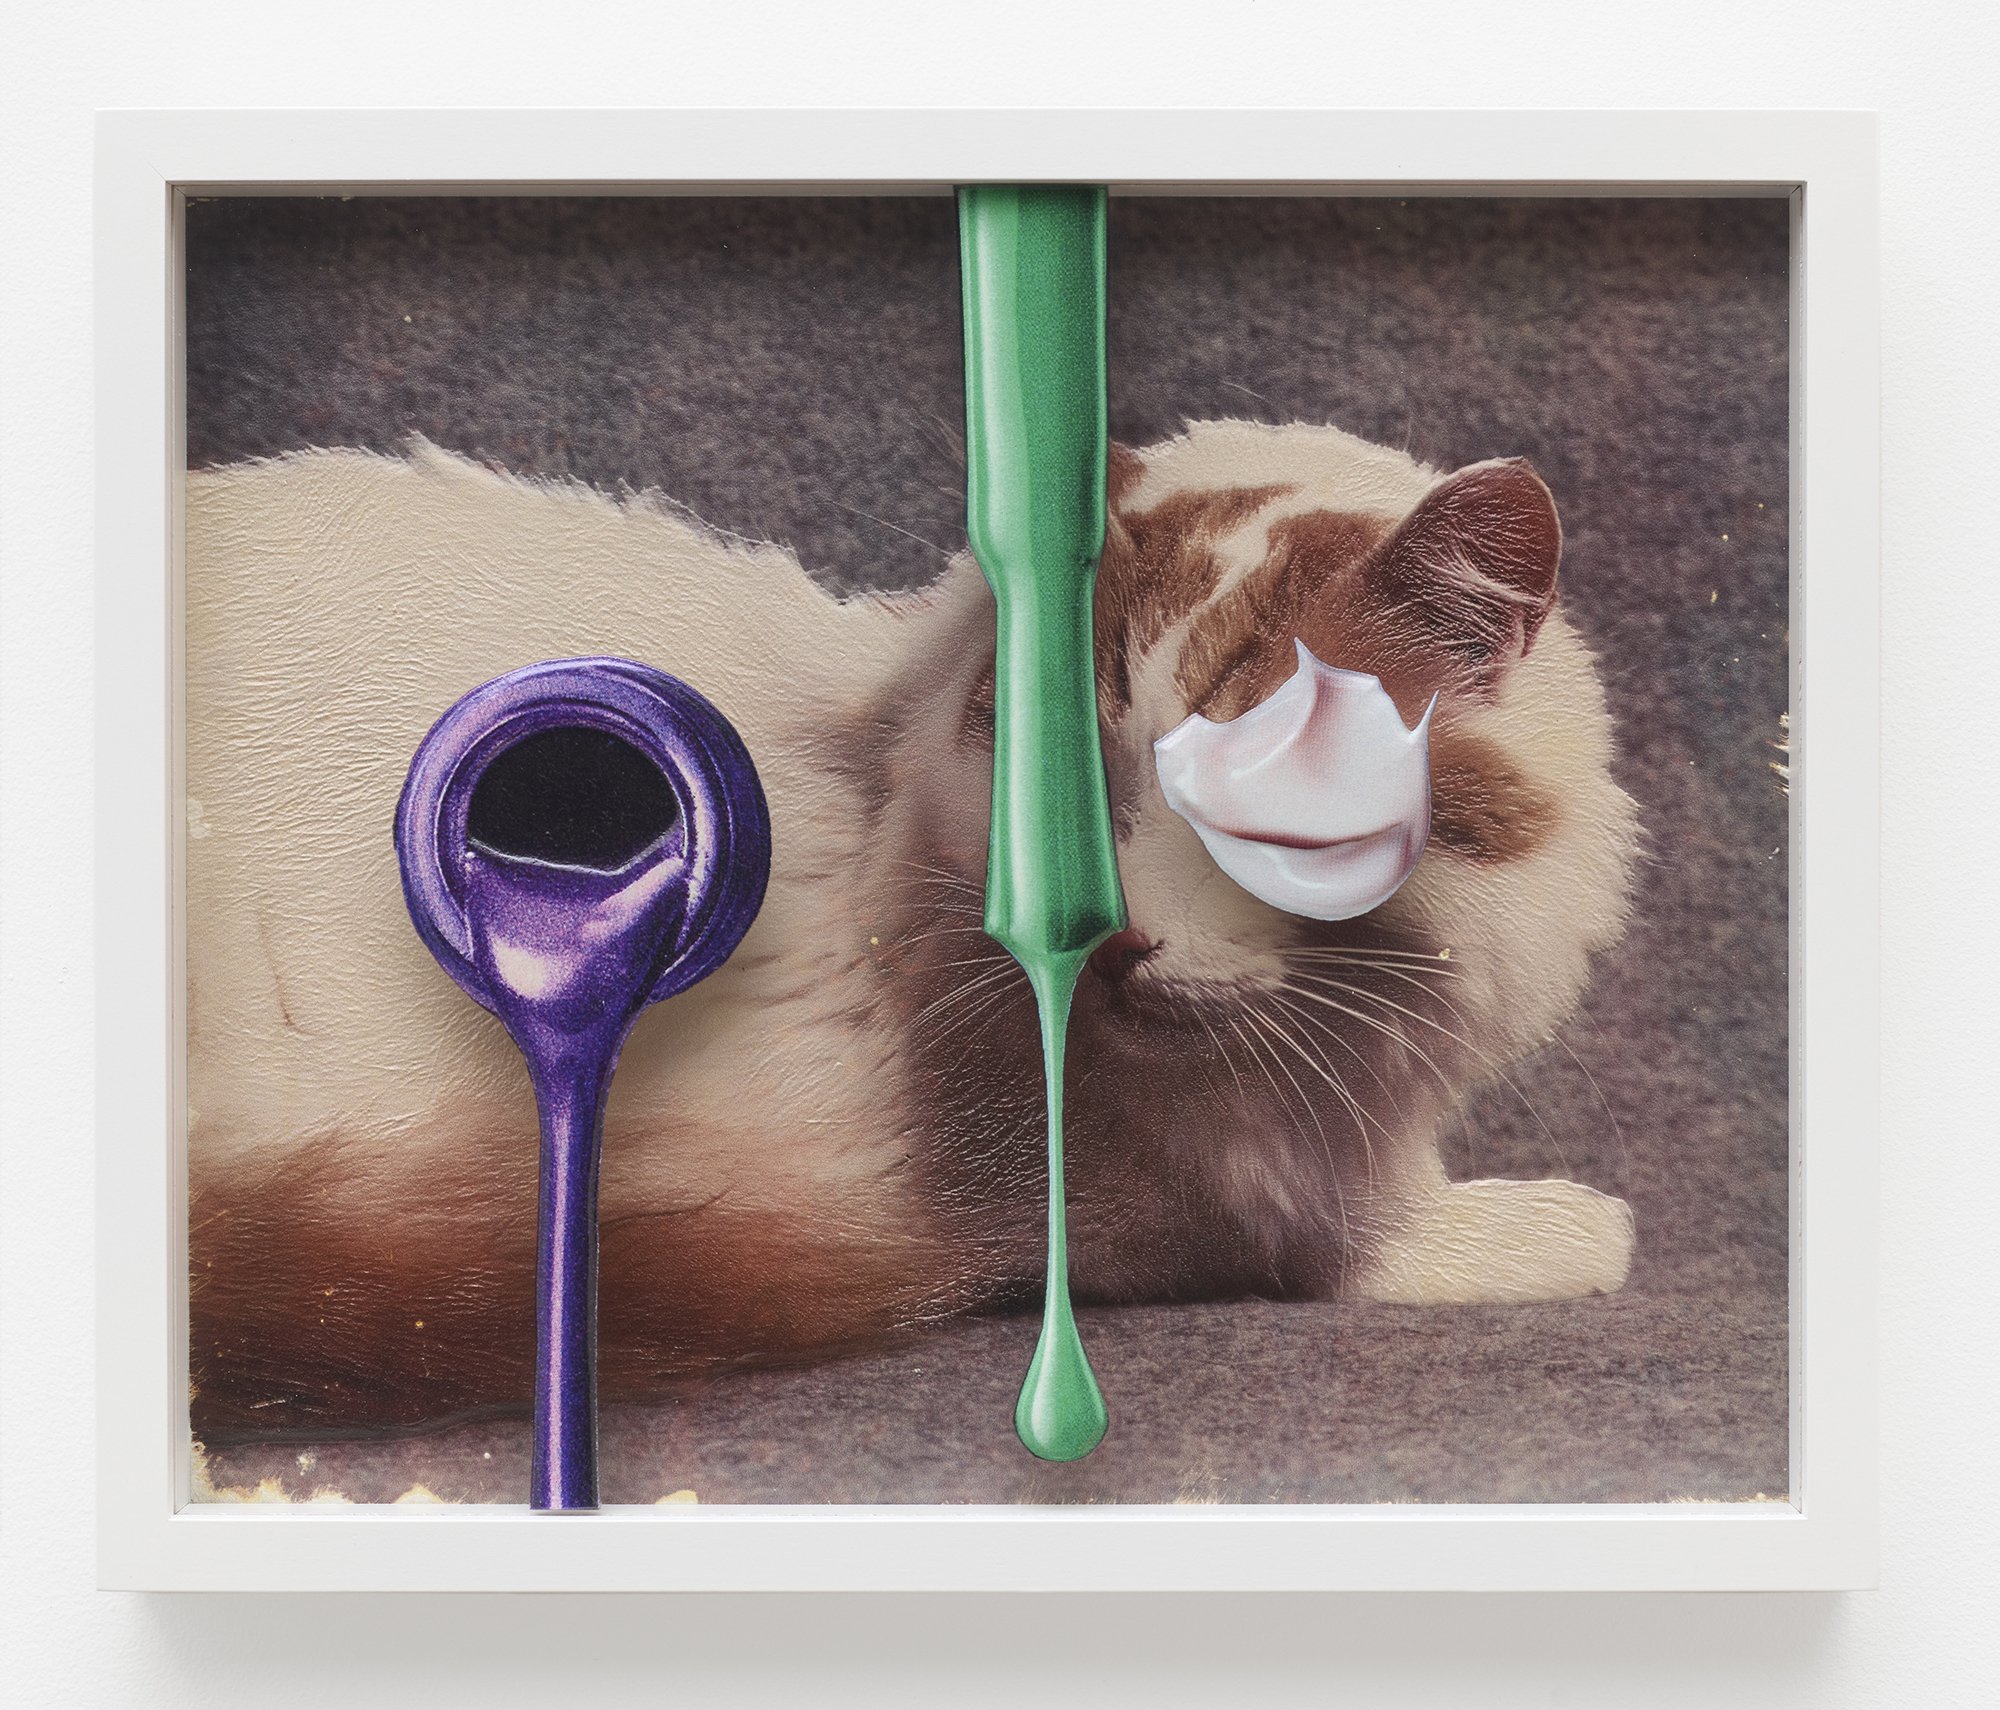   Teppei Kaneuji   Sea and Pus (Photograph of Cat) #8  , 2022. UV inkjet print (StareReap 2.5 print) on acrylic board, polycarbonate, 10 x 12 inches. Edition 3/7 + 2 AP 